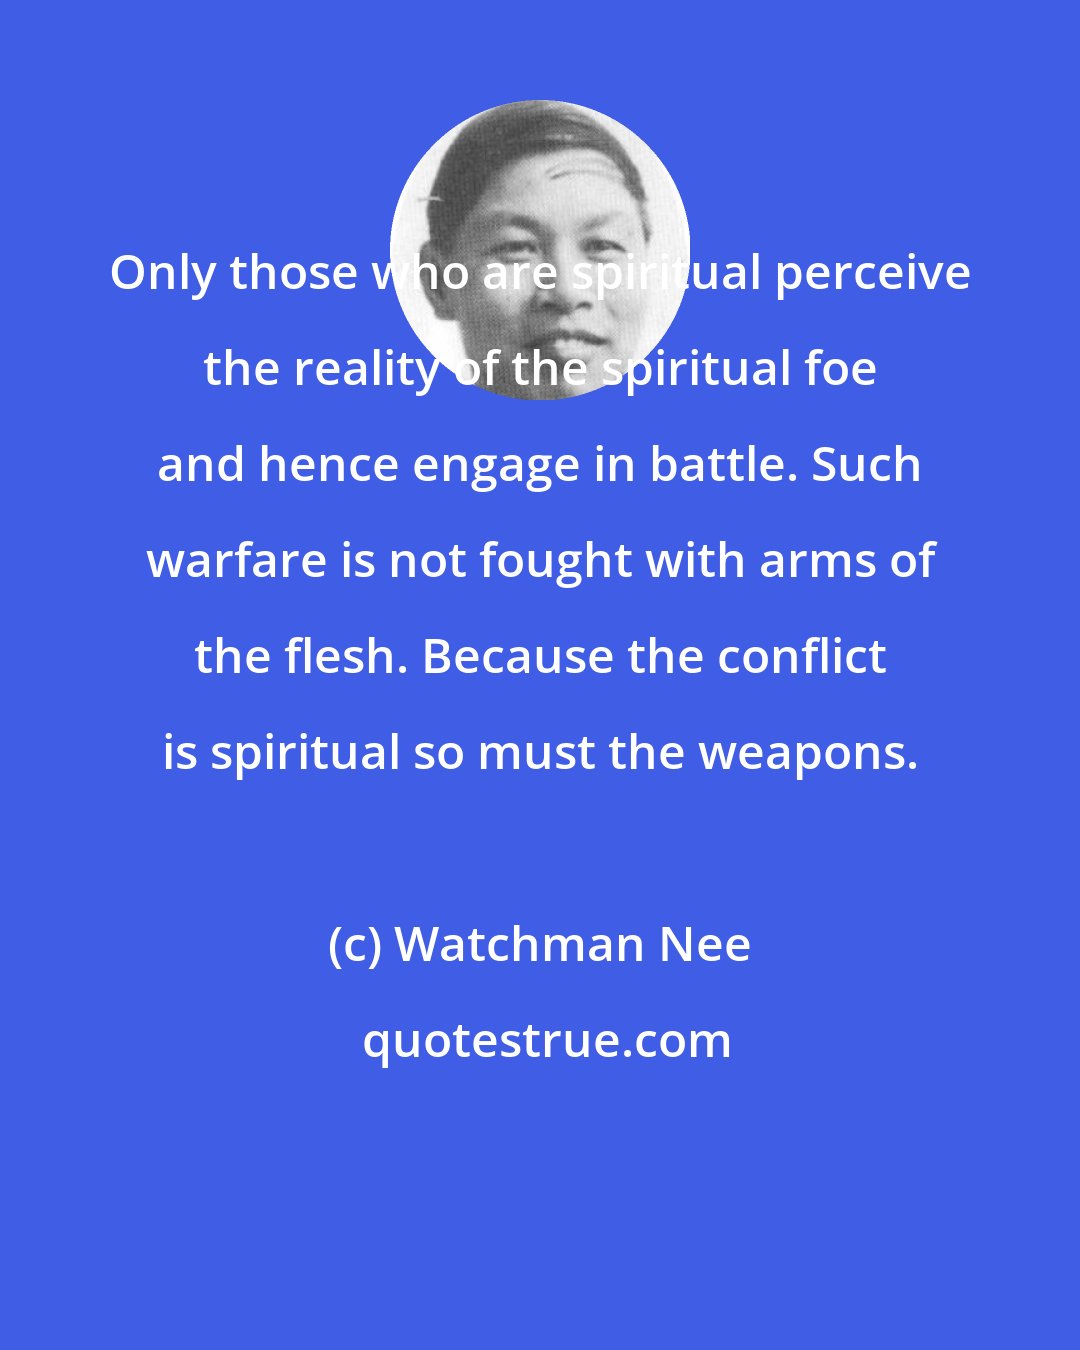 Watchman Nee: Only those who are spiritual perceive the reality of the spiritual foe and hence engage in battle. Such warfare is not fought with arms of the flesh. Because the conflict is spiritual so must the weapons.